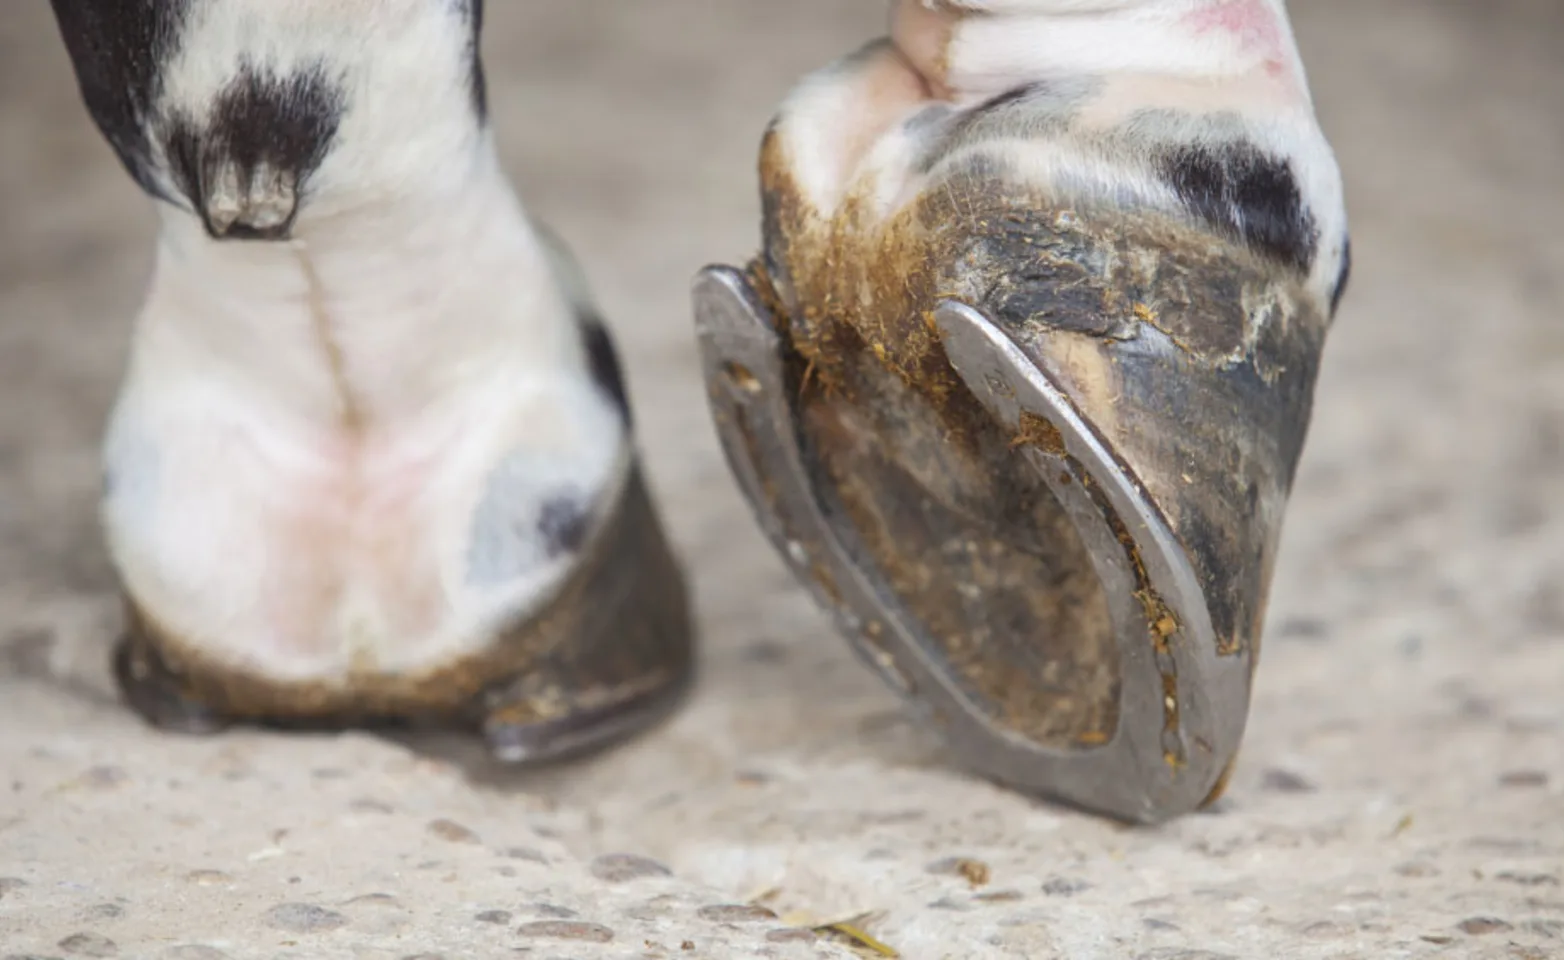 Close up photo of horse hoof with shoe